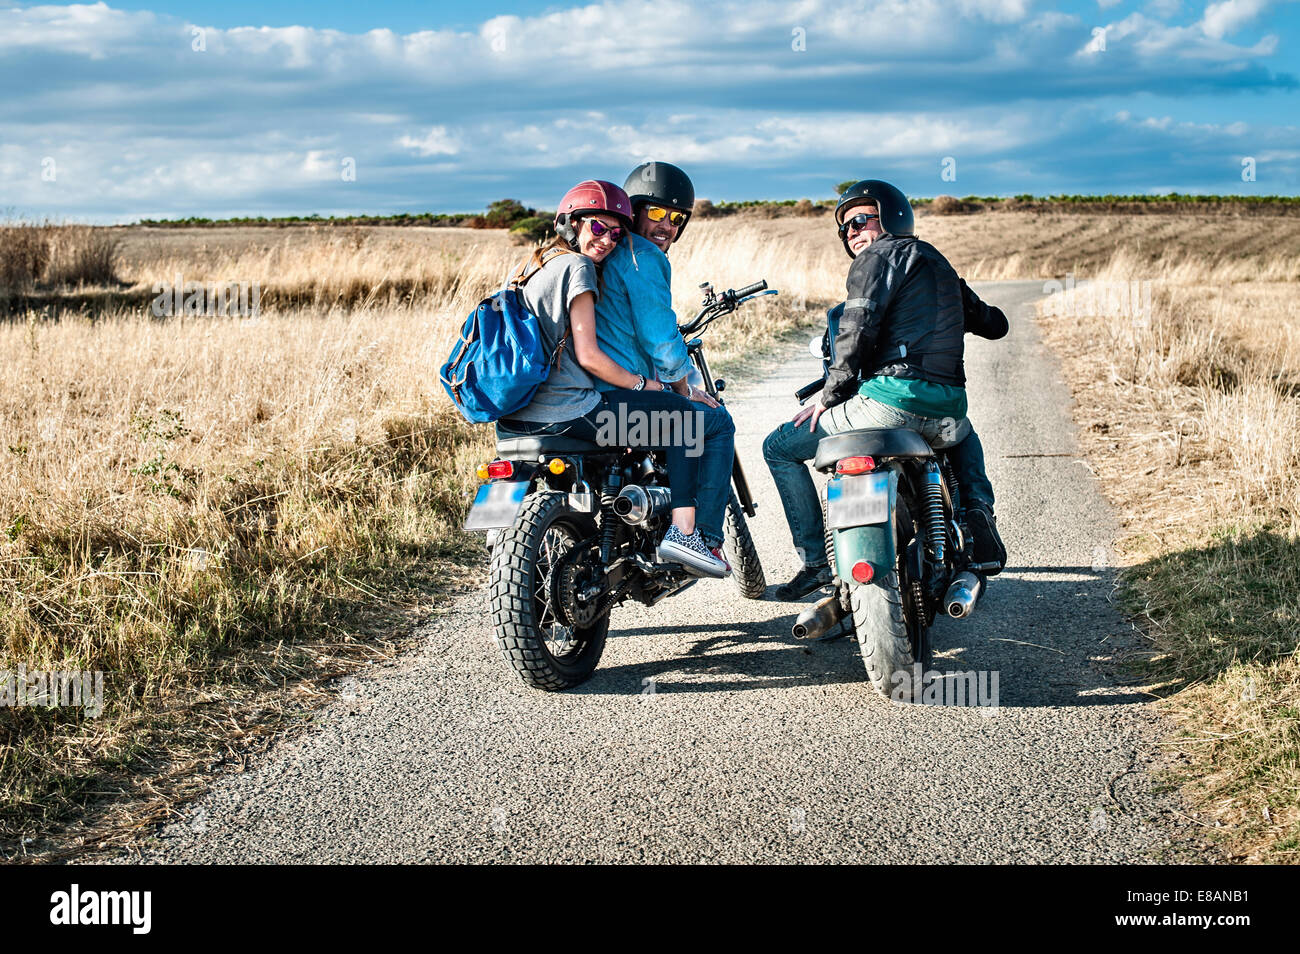 Rear view of three friends on motorcycles on rural road, Cagliari, Sardinia, Italy Stock Photo